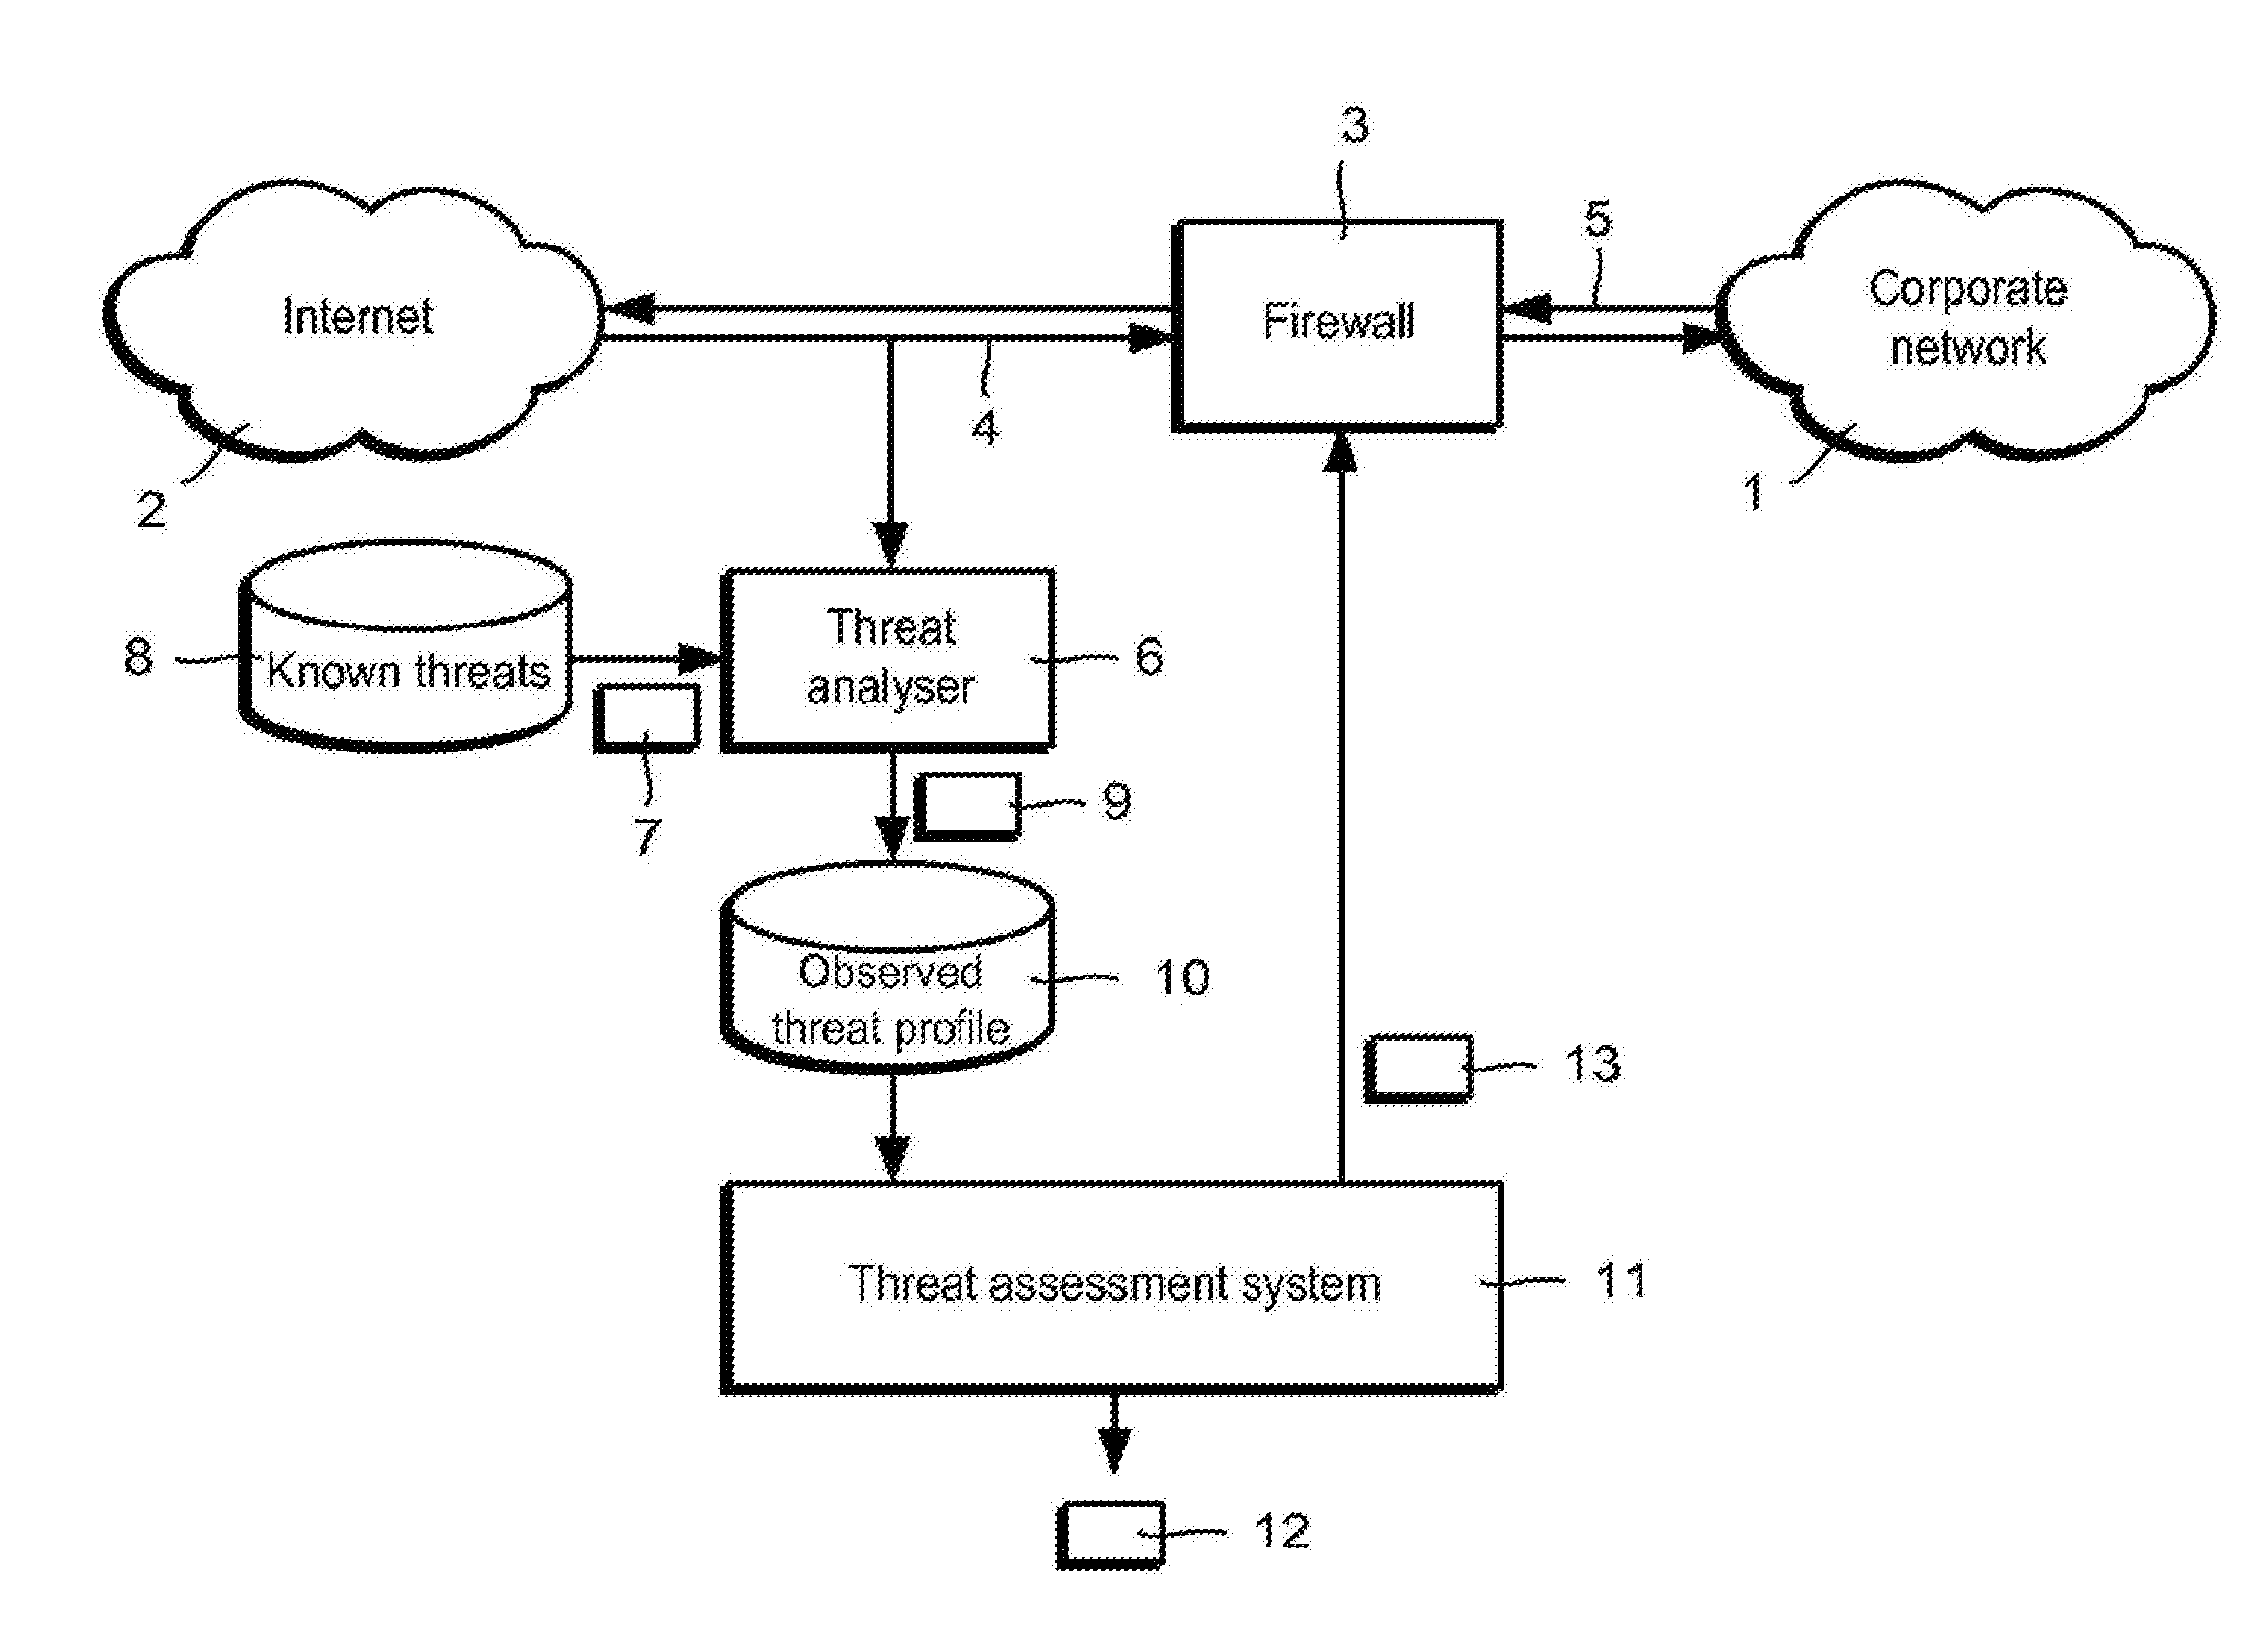 Apparatus and method for assessing financial loss from cyber threats capable of affecting at least one computer network